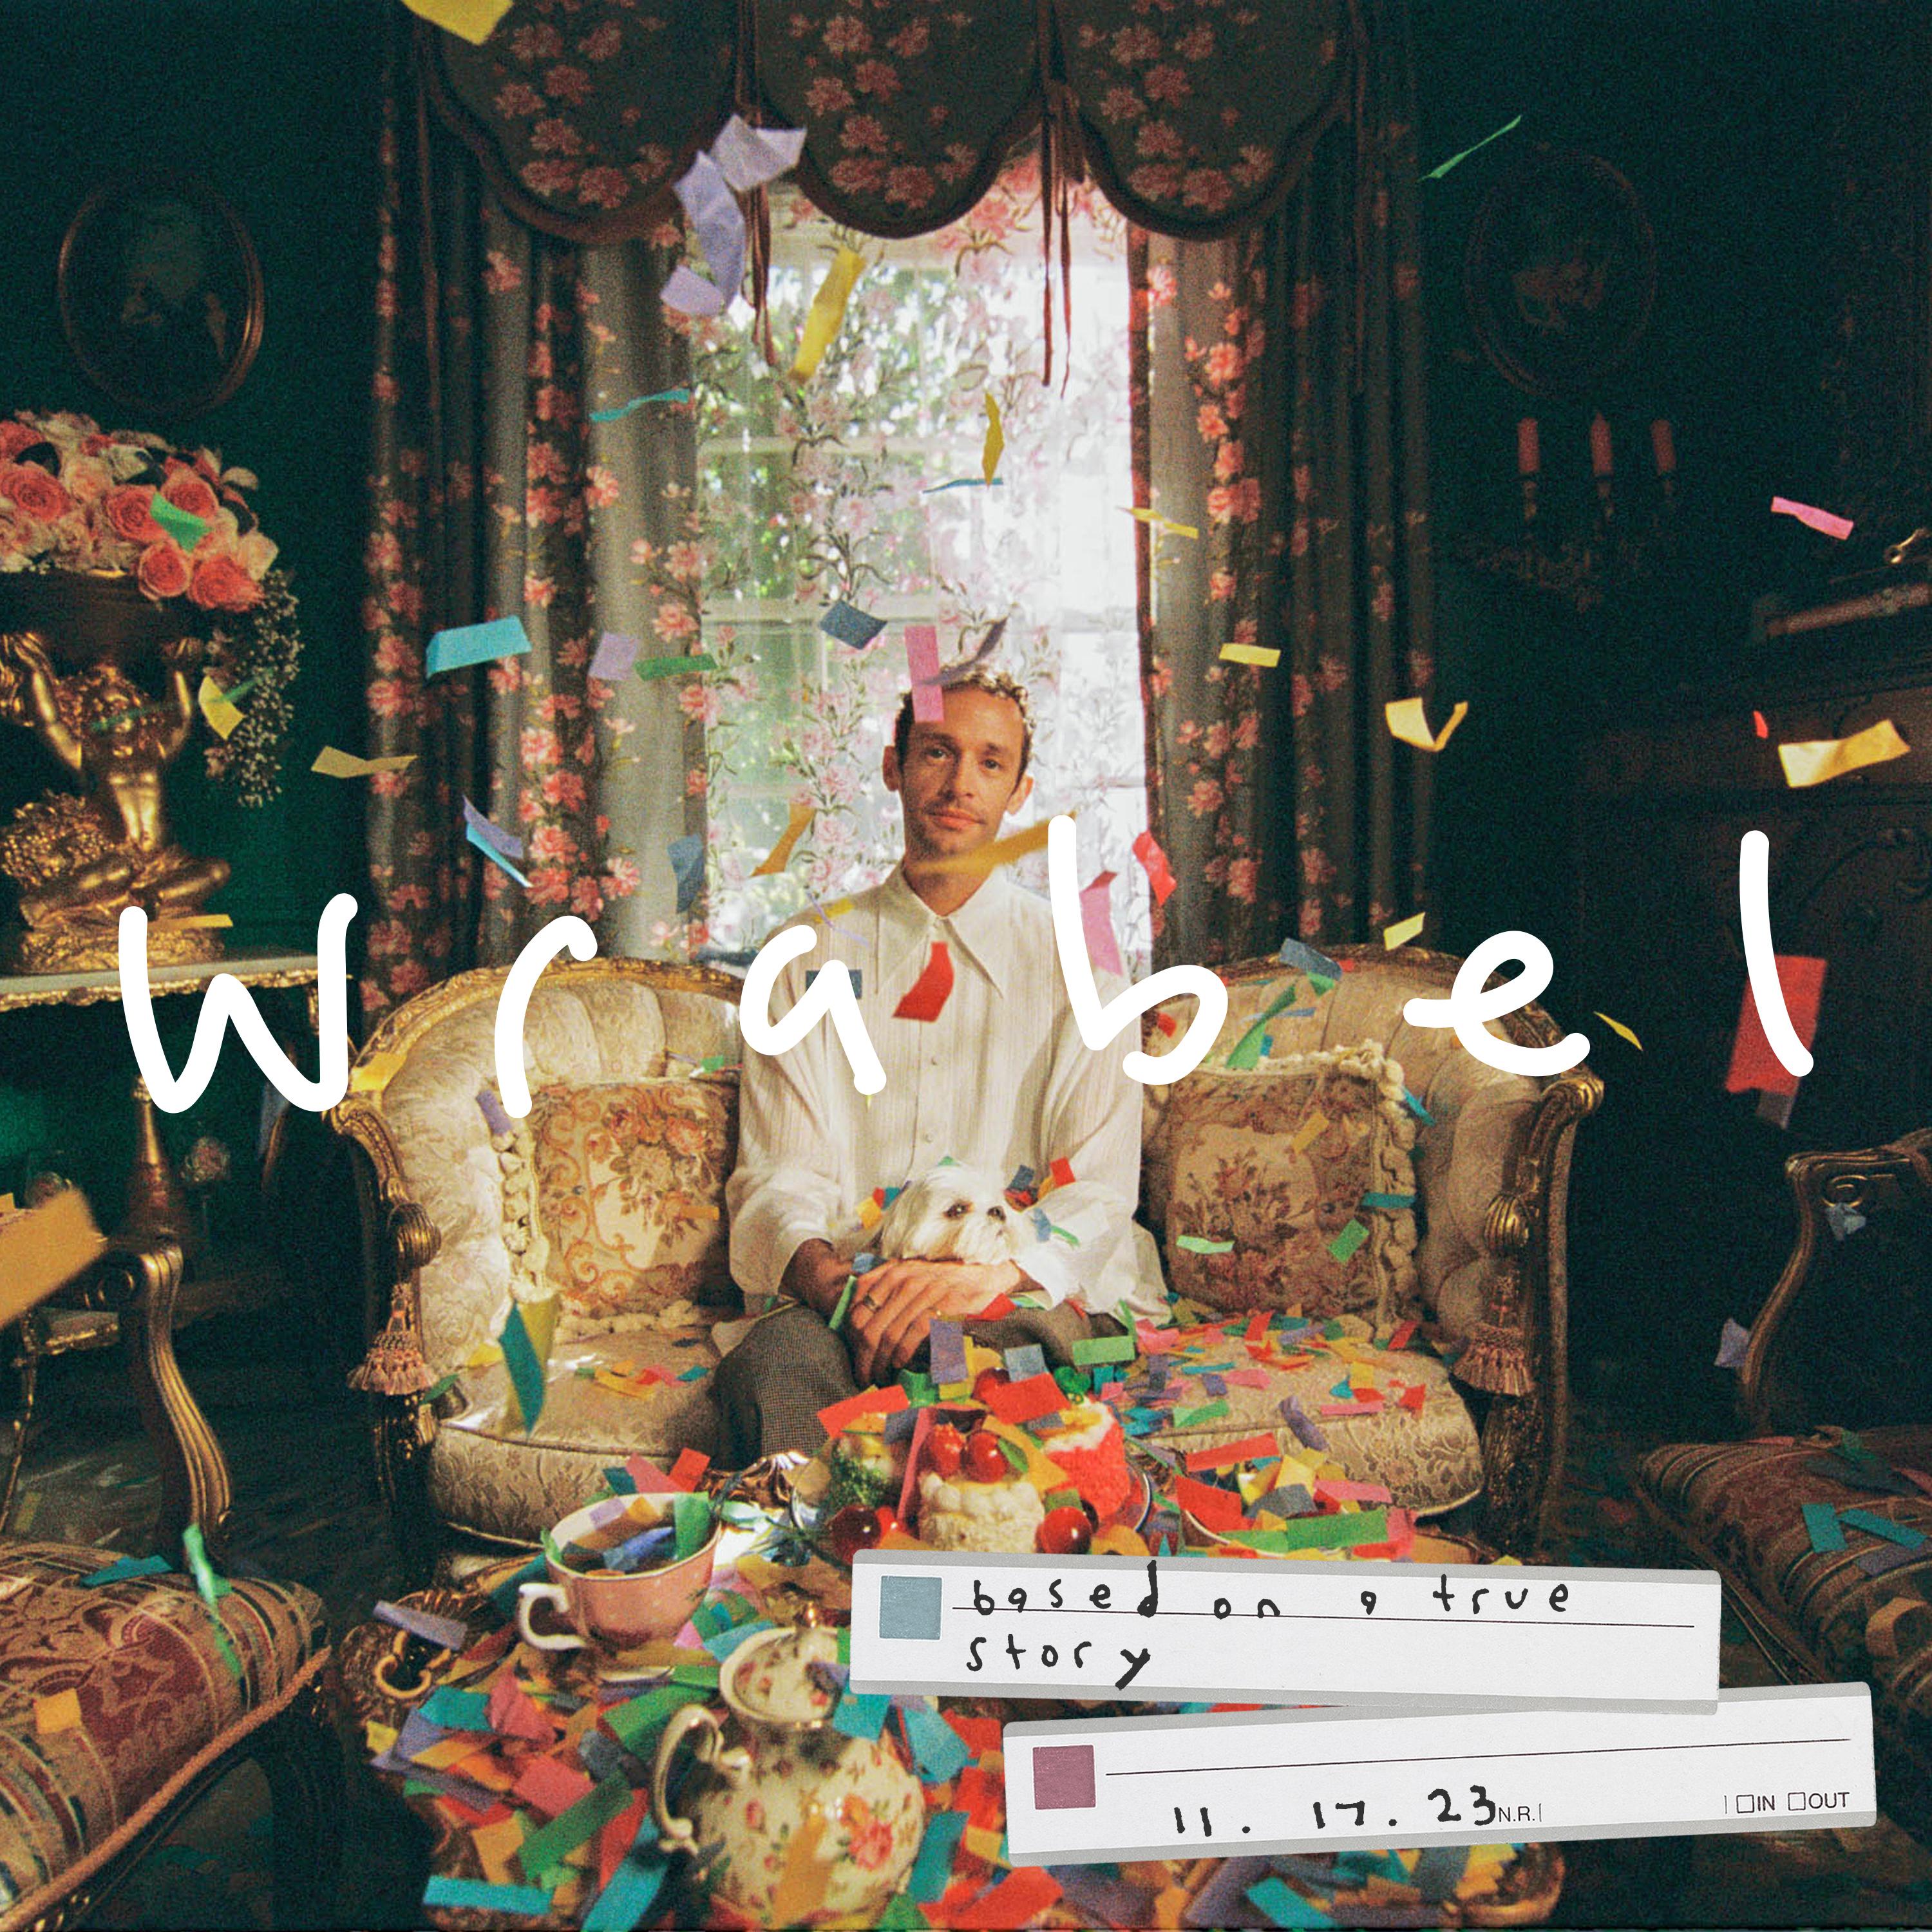 Wrabel - another song about love